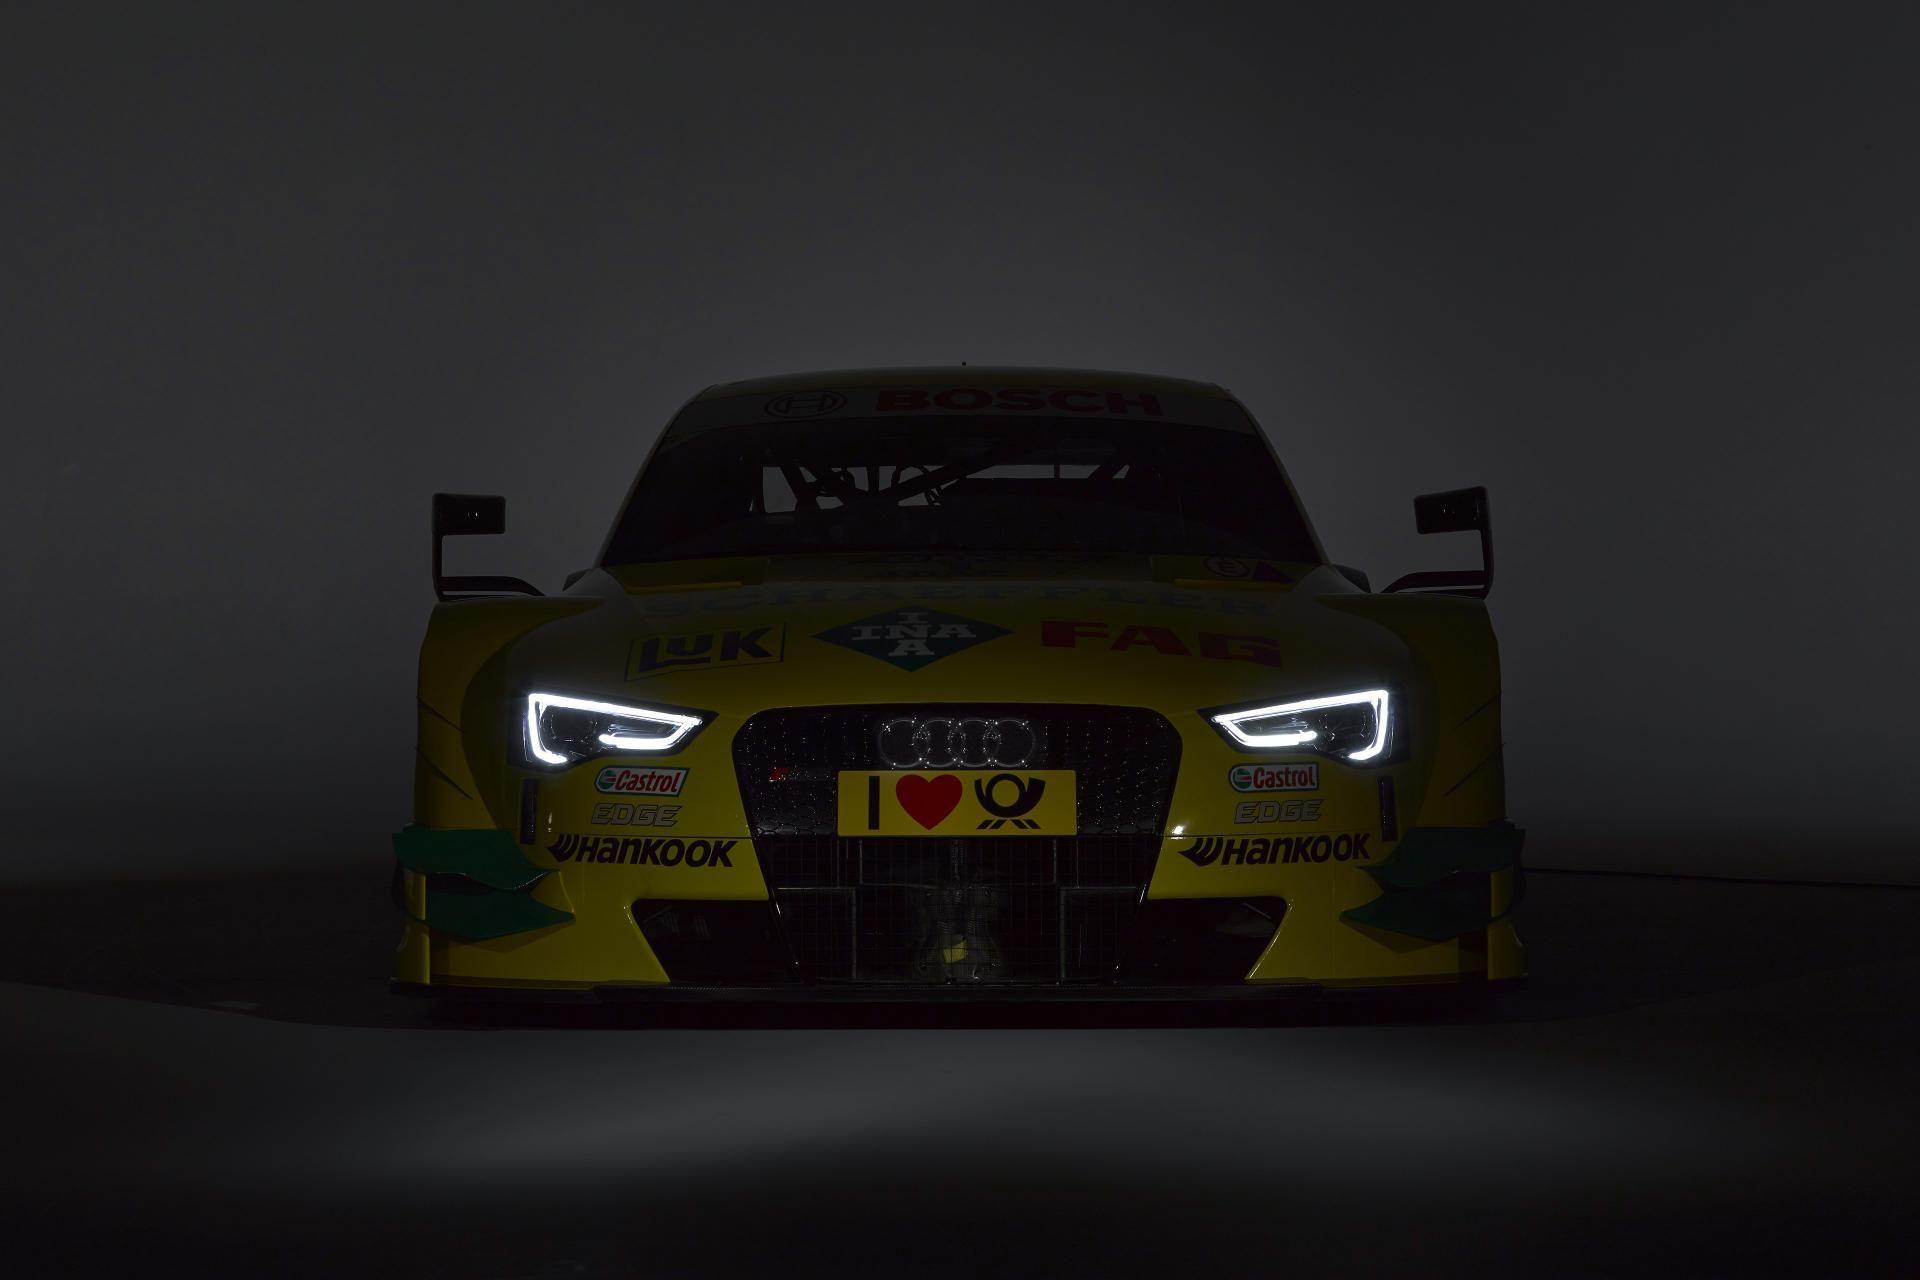 Audi RS 5 DTM Picture, News, Research, Pricing, msrp